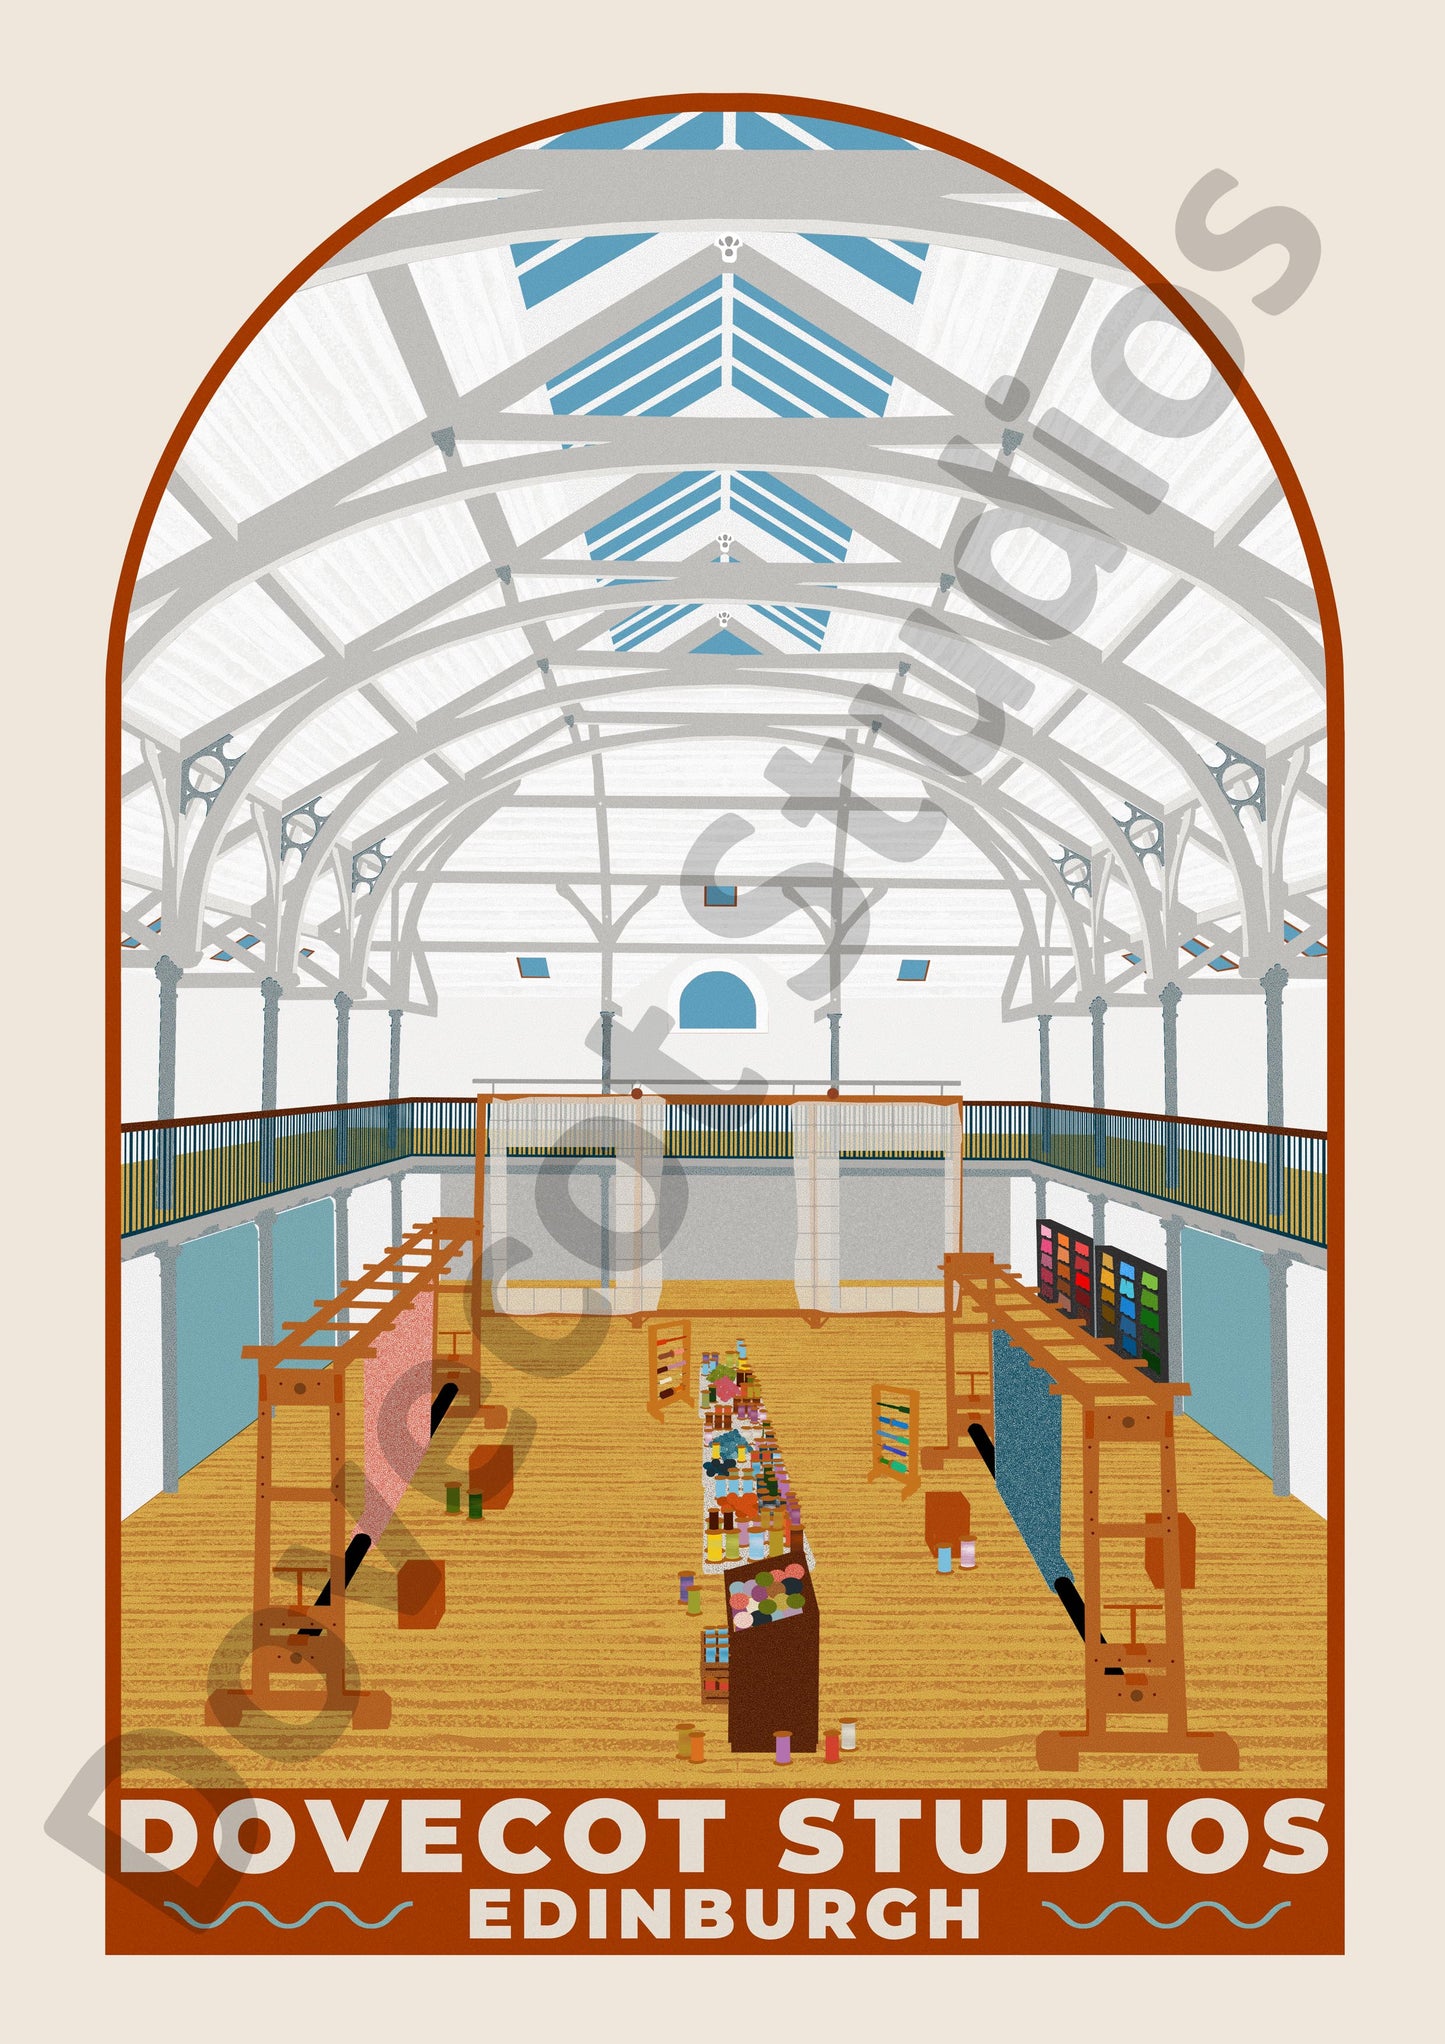 Dovecot Studios, A2 Poster by Ellie Way